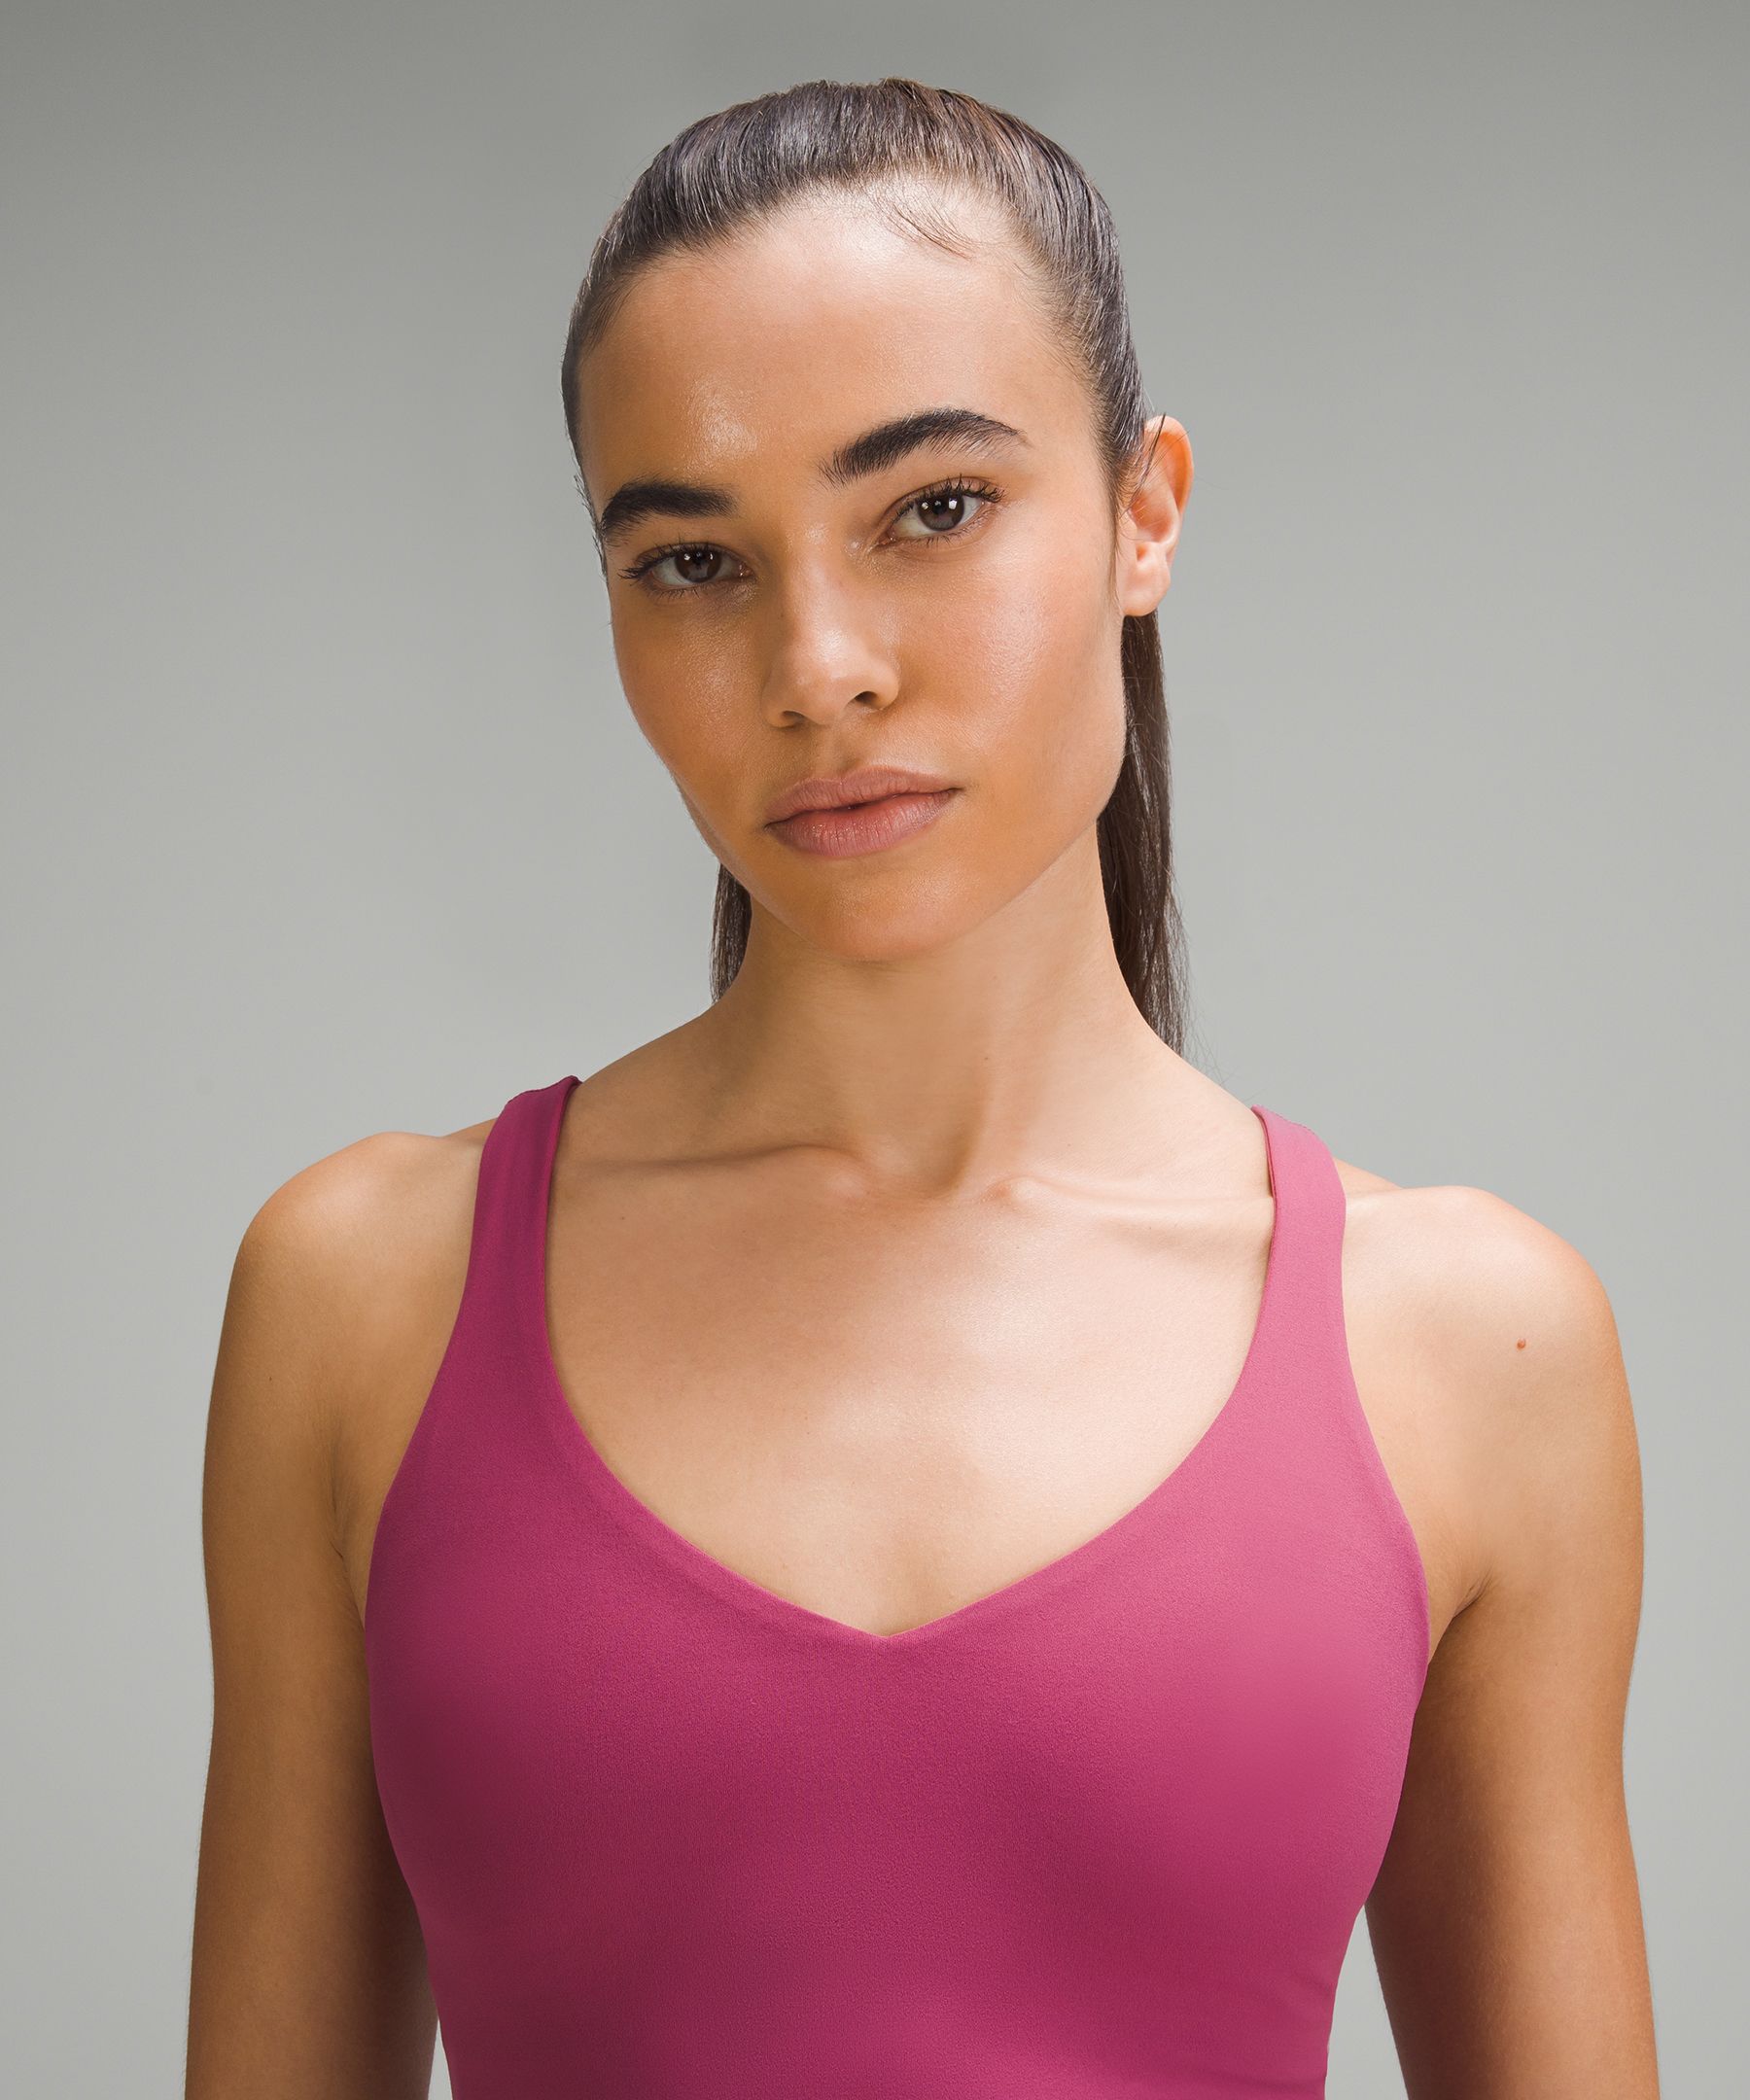 lululemon - The Deep V Tank - supportive for the bust and body